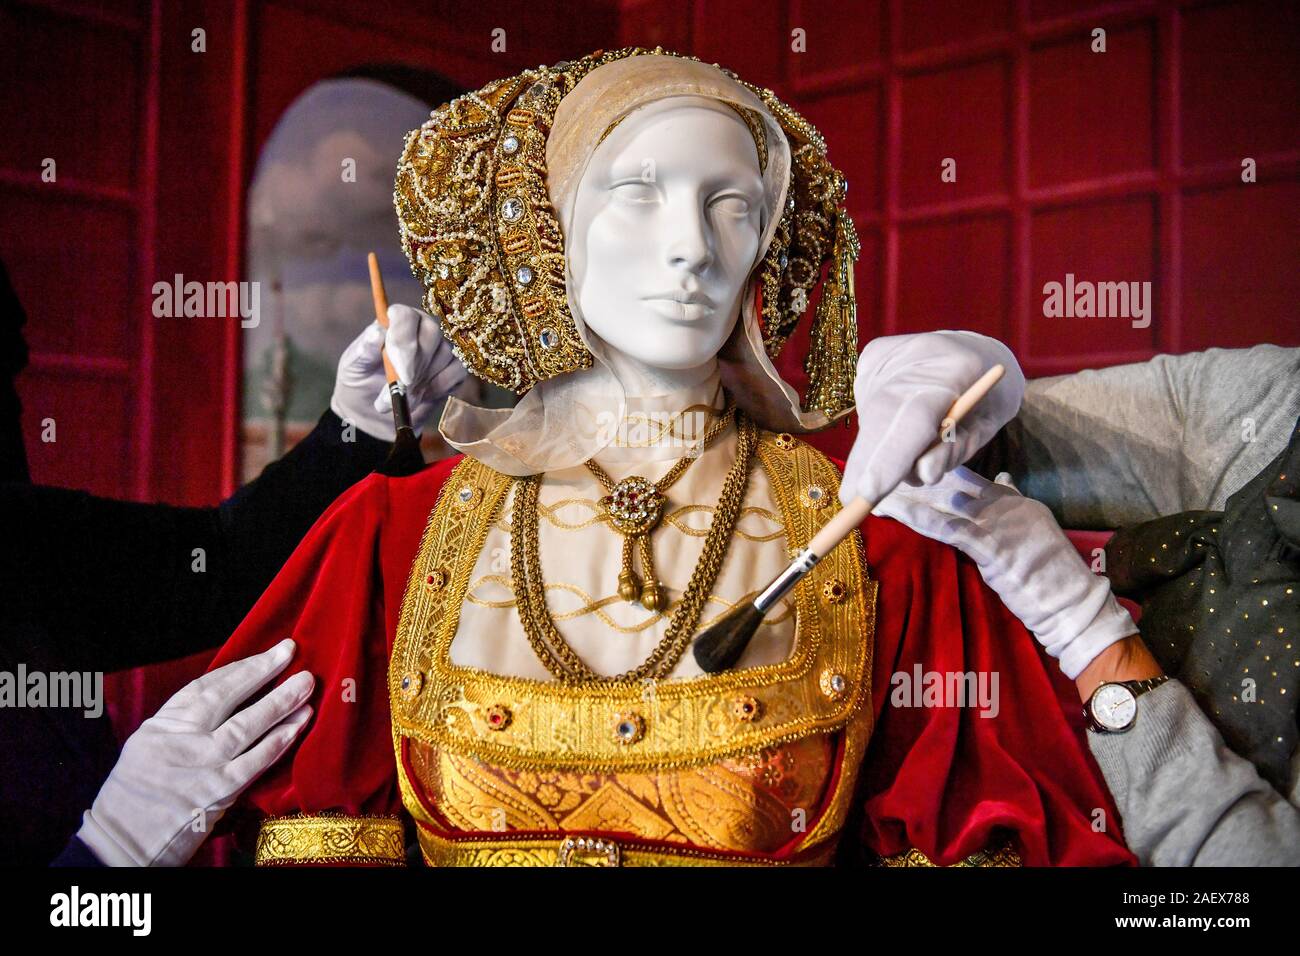 A life size mannequin of Anne of Cleves, the fourth wife of King Henry VIII, is gently brushed and cleaned as part of the cleaning and maintenance of exhibitions at Sudeley Castle in Winchcombe, Gloucestershire. Katherine Parr, the last and surviving wife of King Henry VIII, lived, died and is buried within the grounds of the castle. Stock Photo